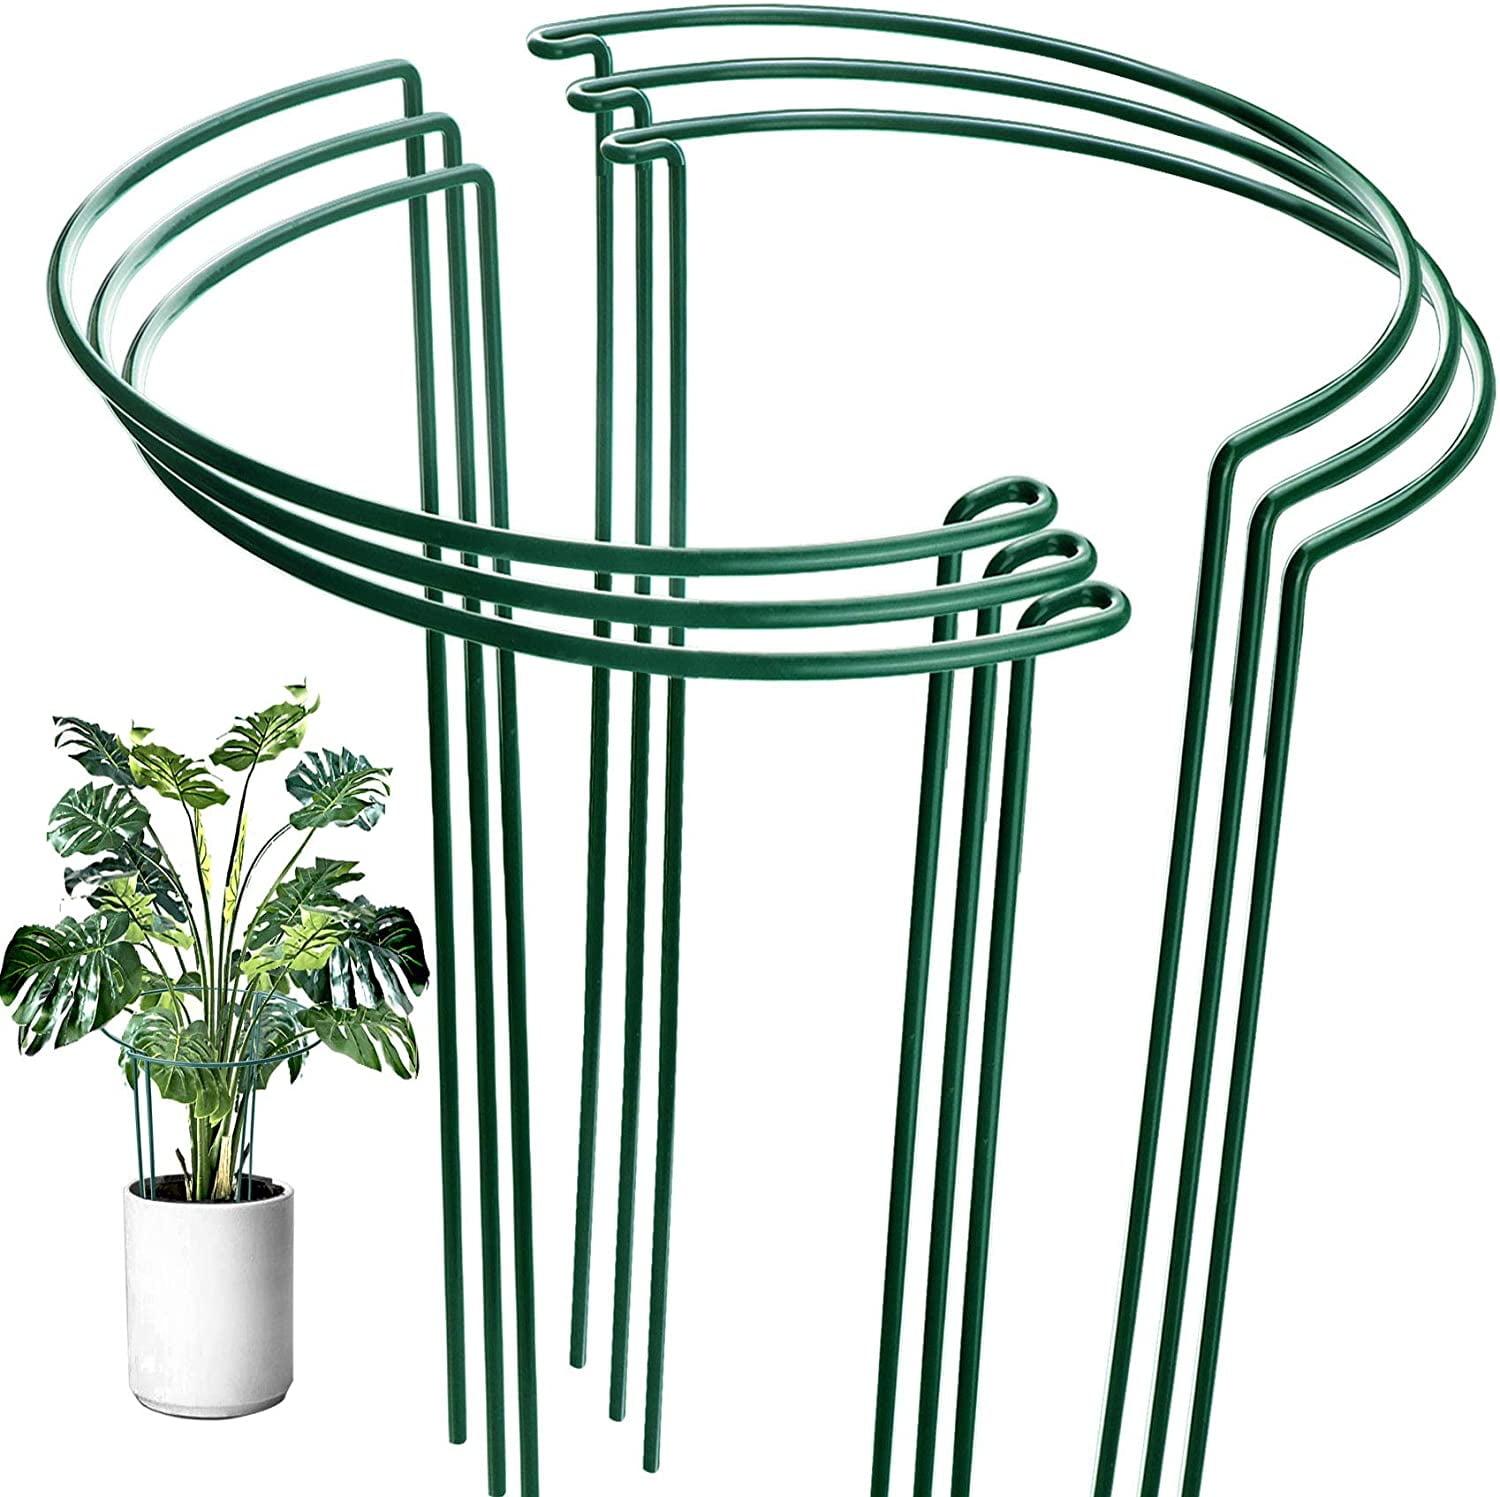 PLANT/ FLOWER SUPPORT RING FOR BAMBOO CANES 25cm 1 X 10 INCH 